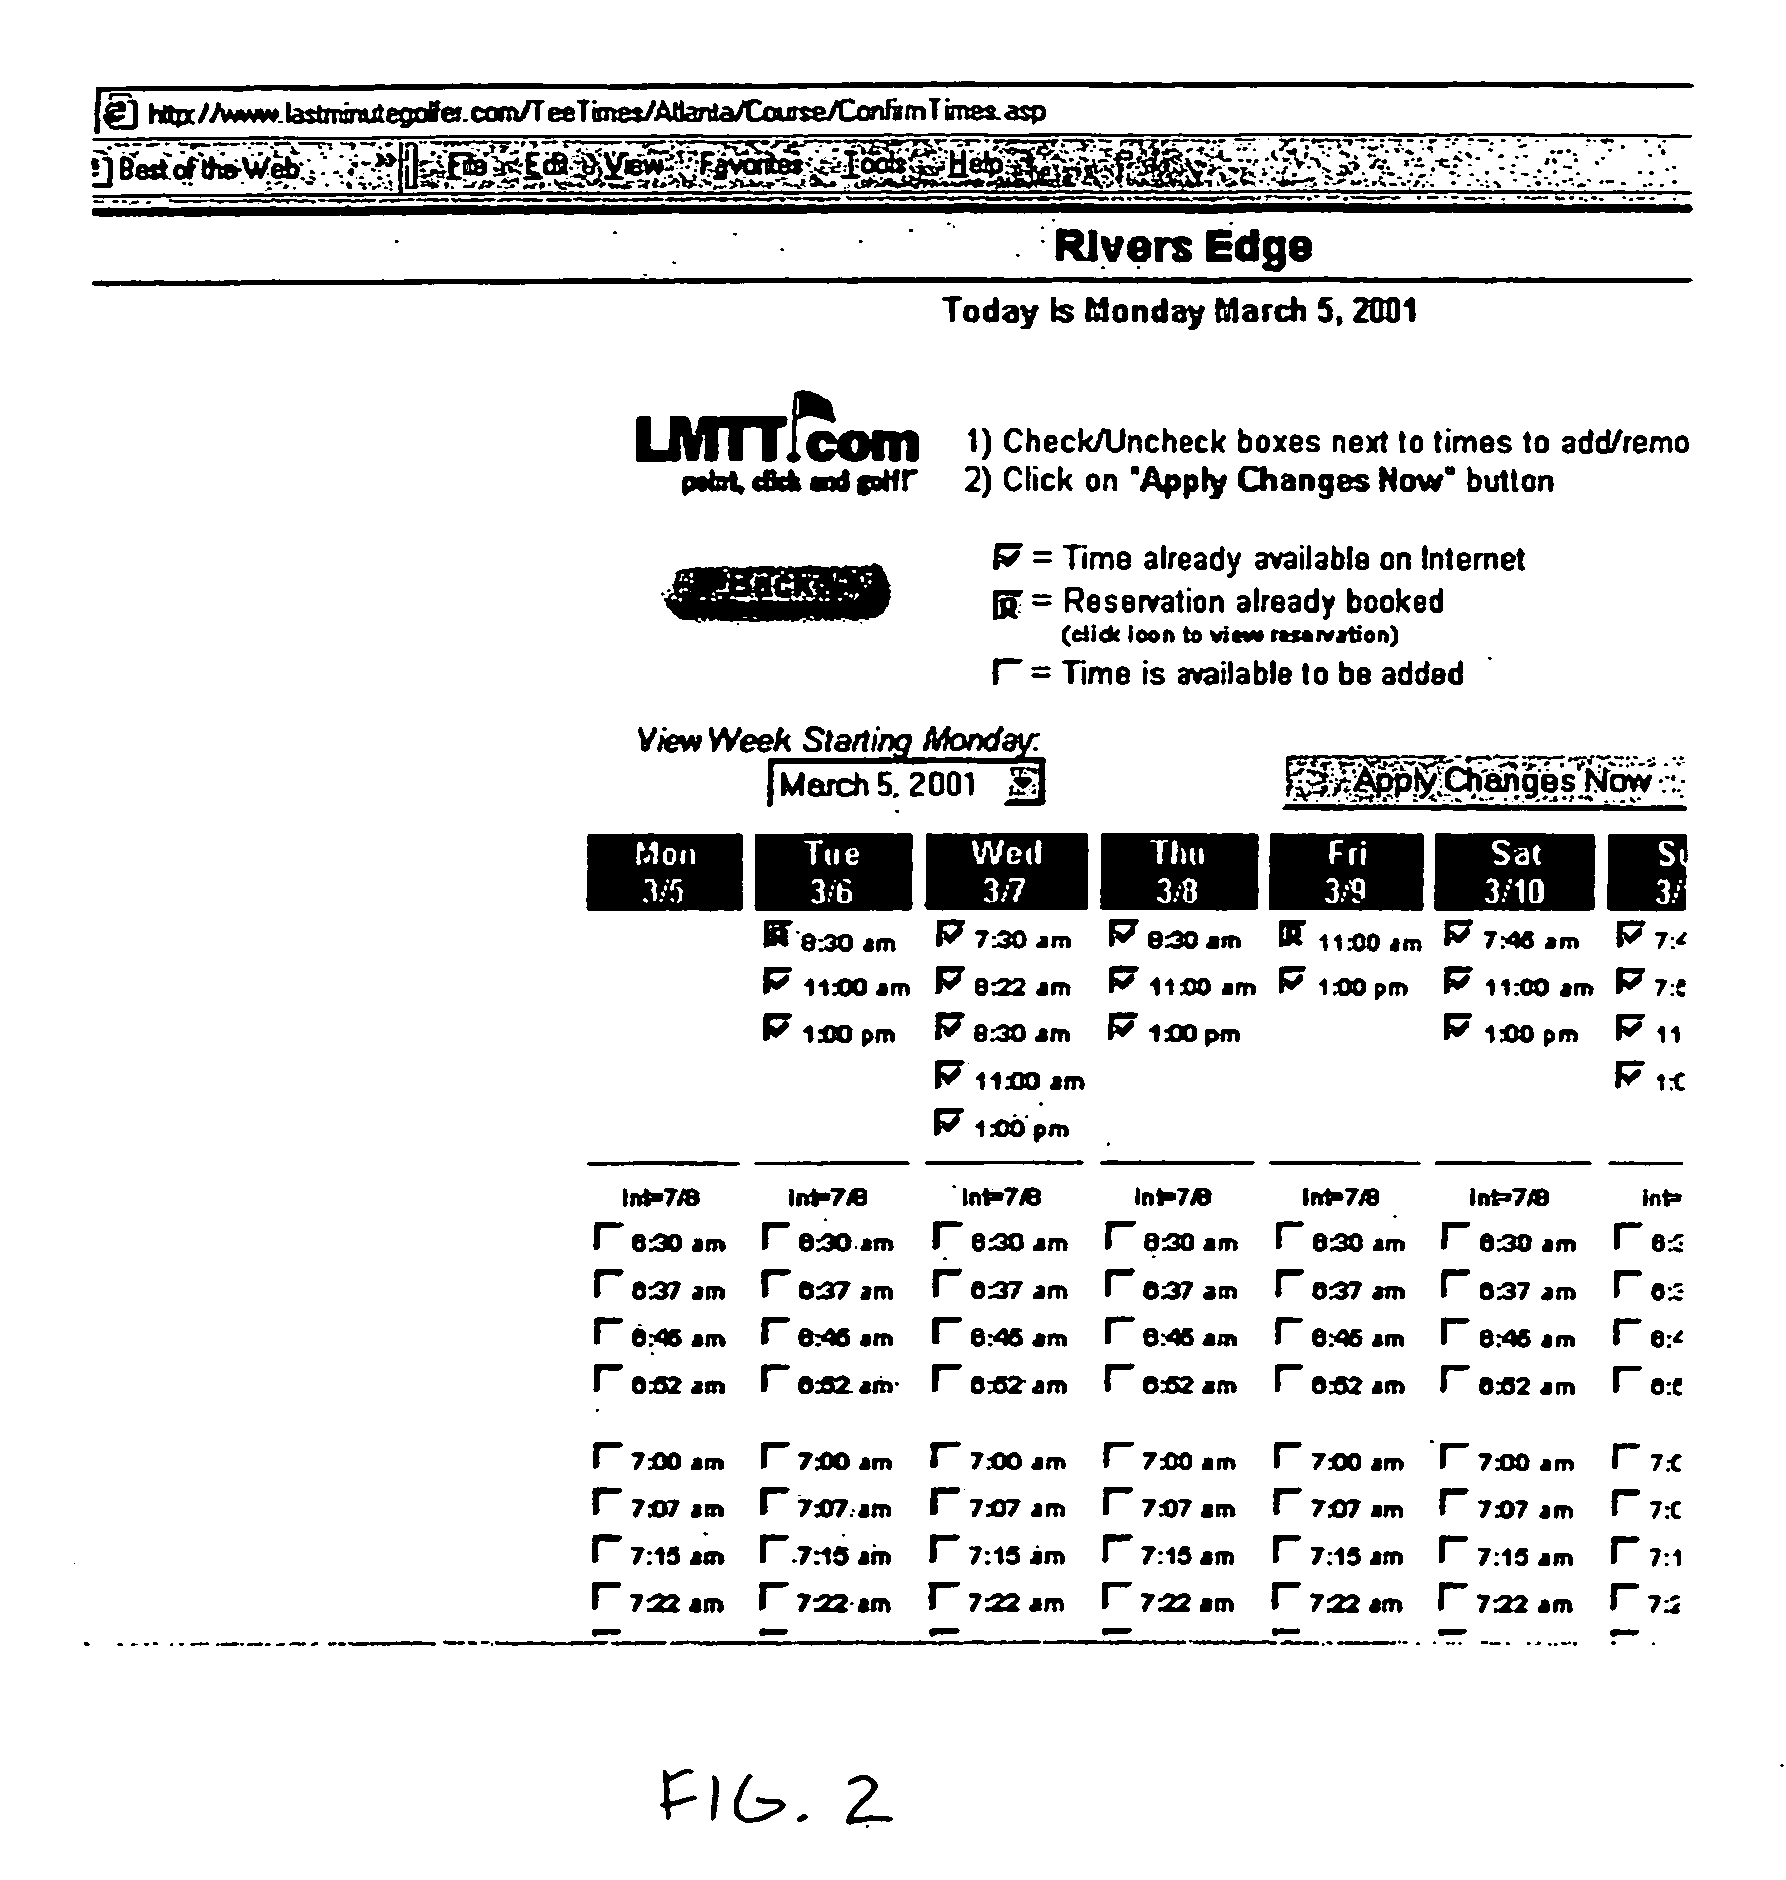 System and method for posting available time slots to a network hub